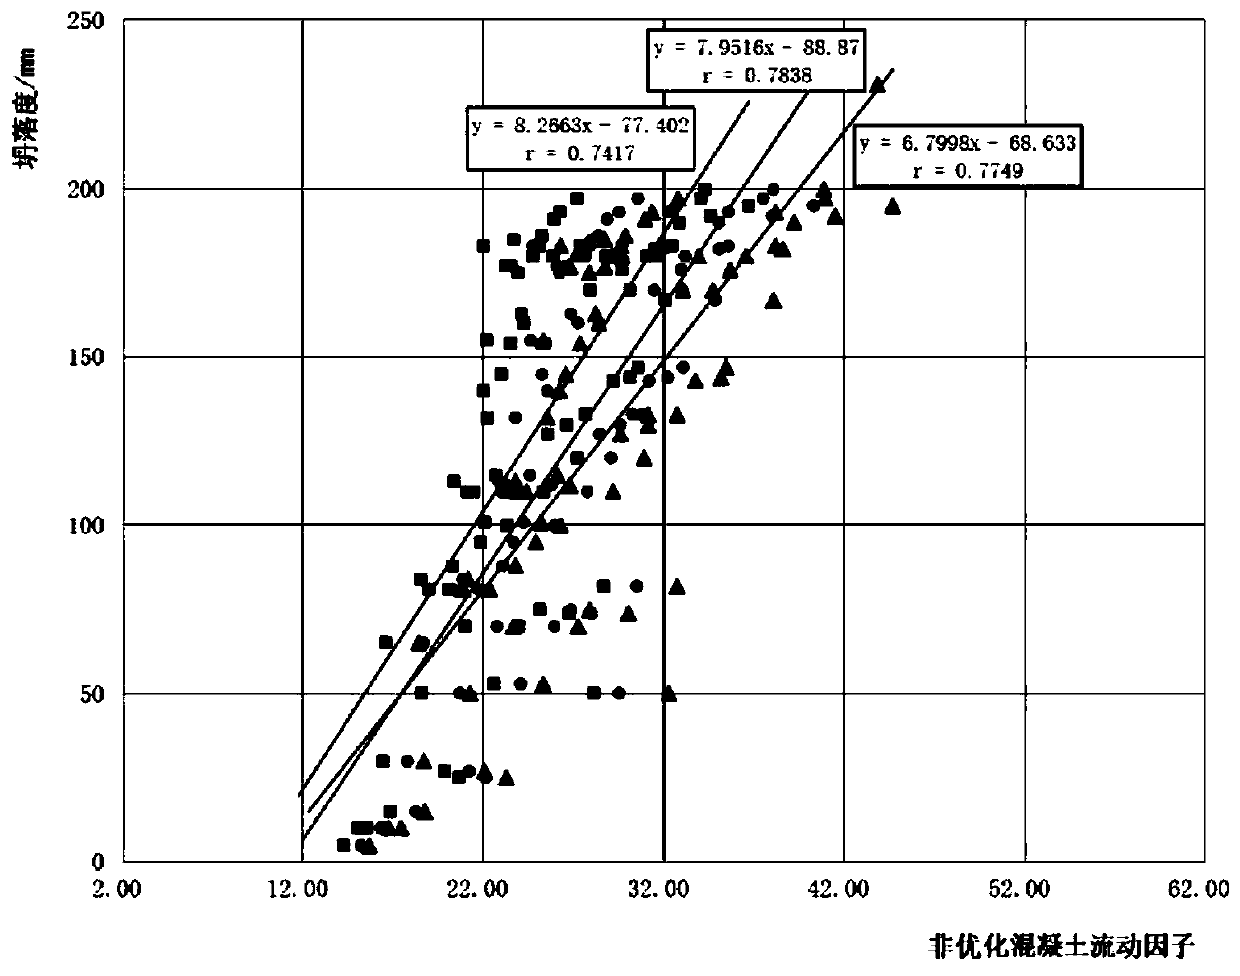 Concrete slump inference method based on mix proportion and raw material performance